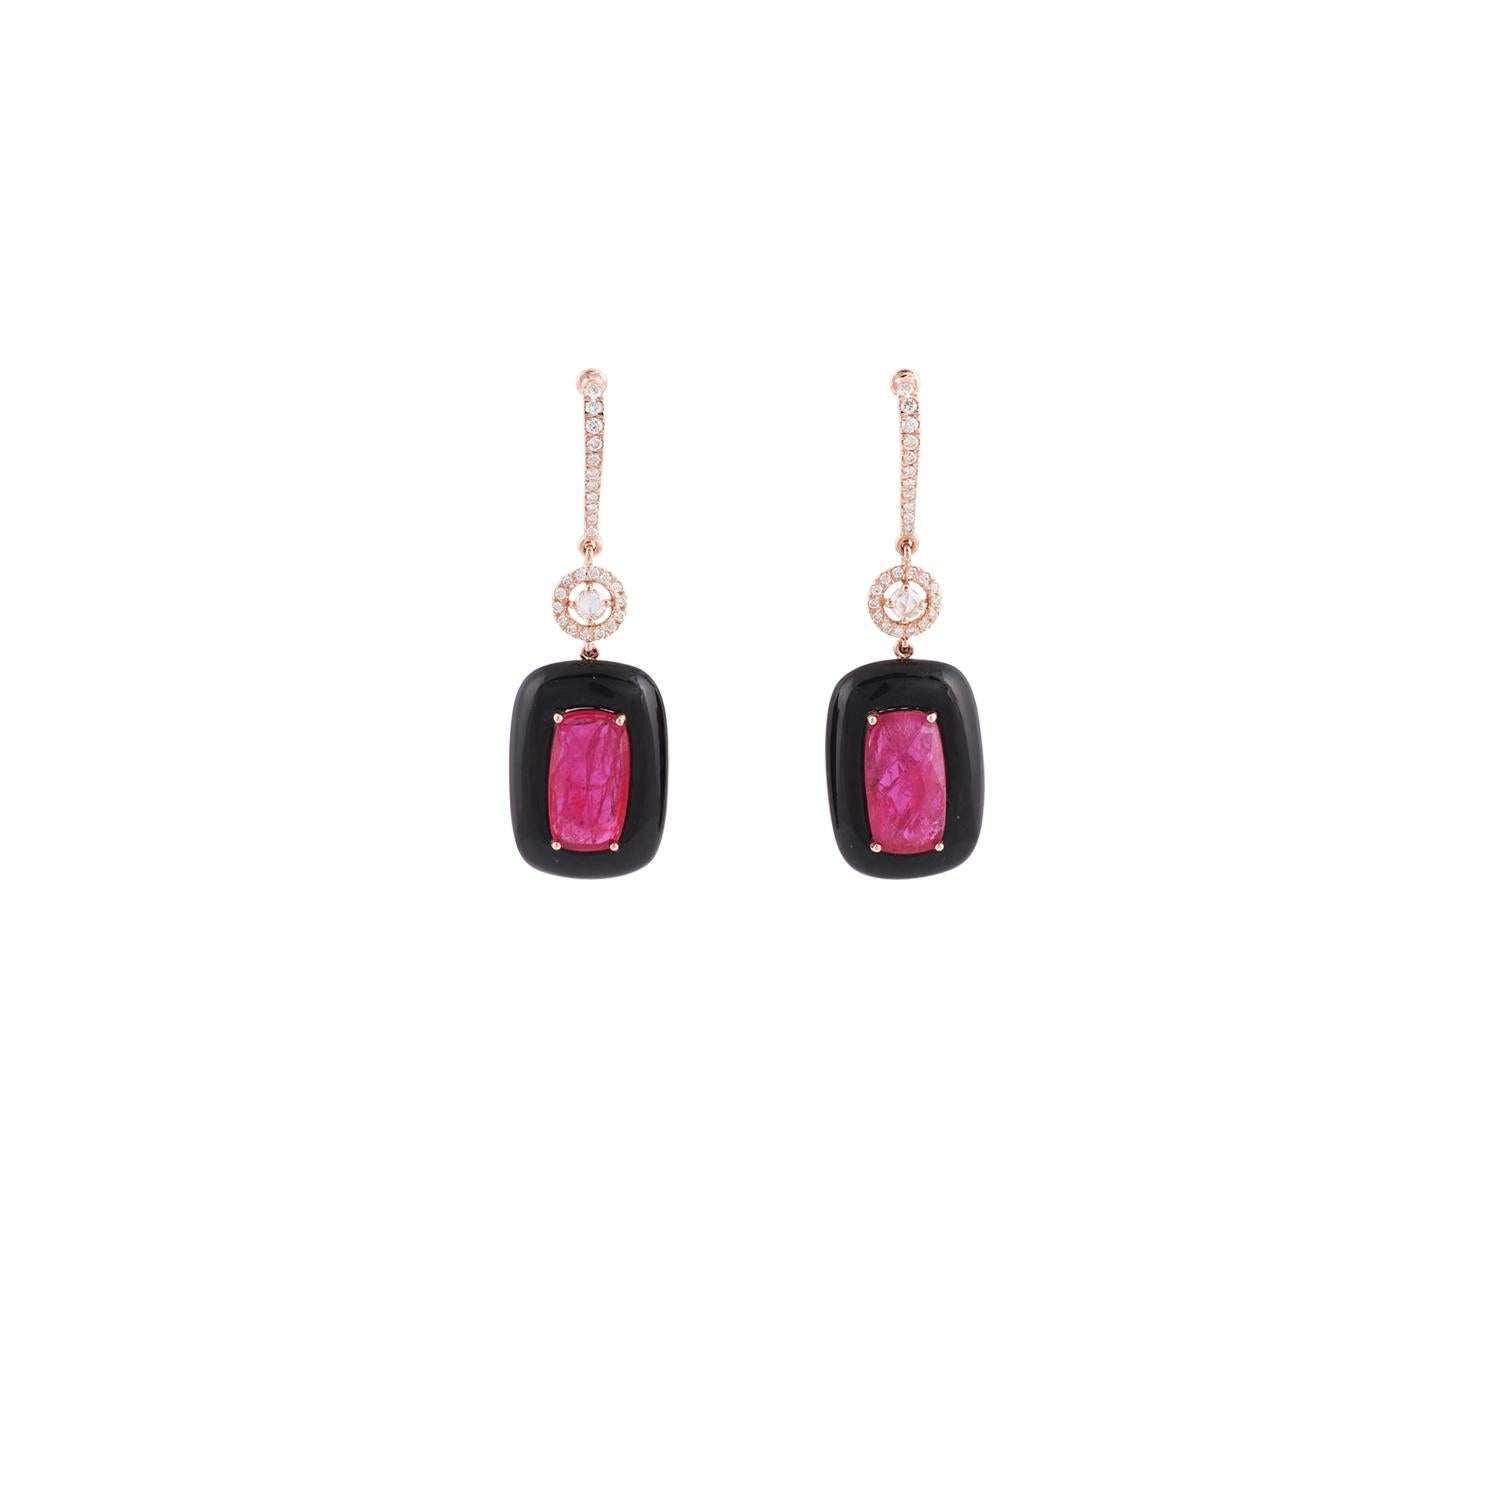 These are an exclusive designer earrings features 2 pieces of rose cut rubies weight 6.90 carat, set in a frame of black onyx weight 11.62 carat with round shaped diamonds weight 0.49 carat, these earrings are entirely made in 18k rose gold weight